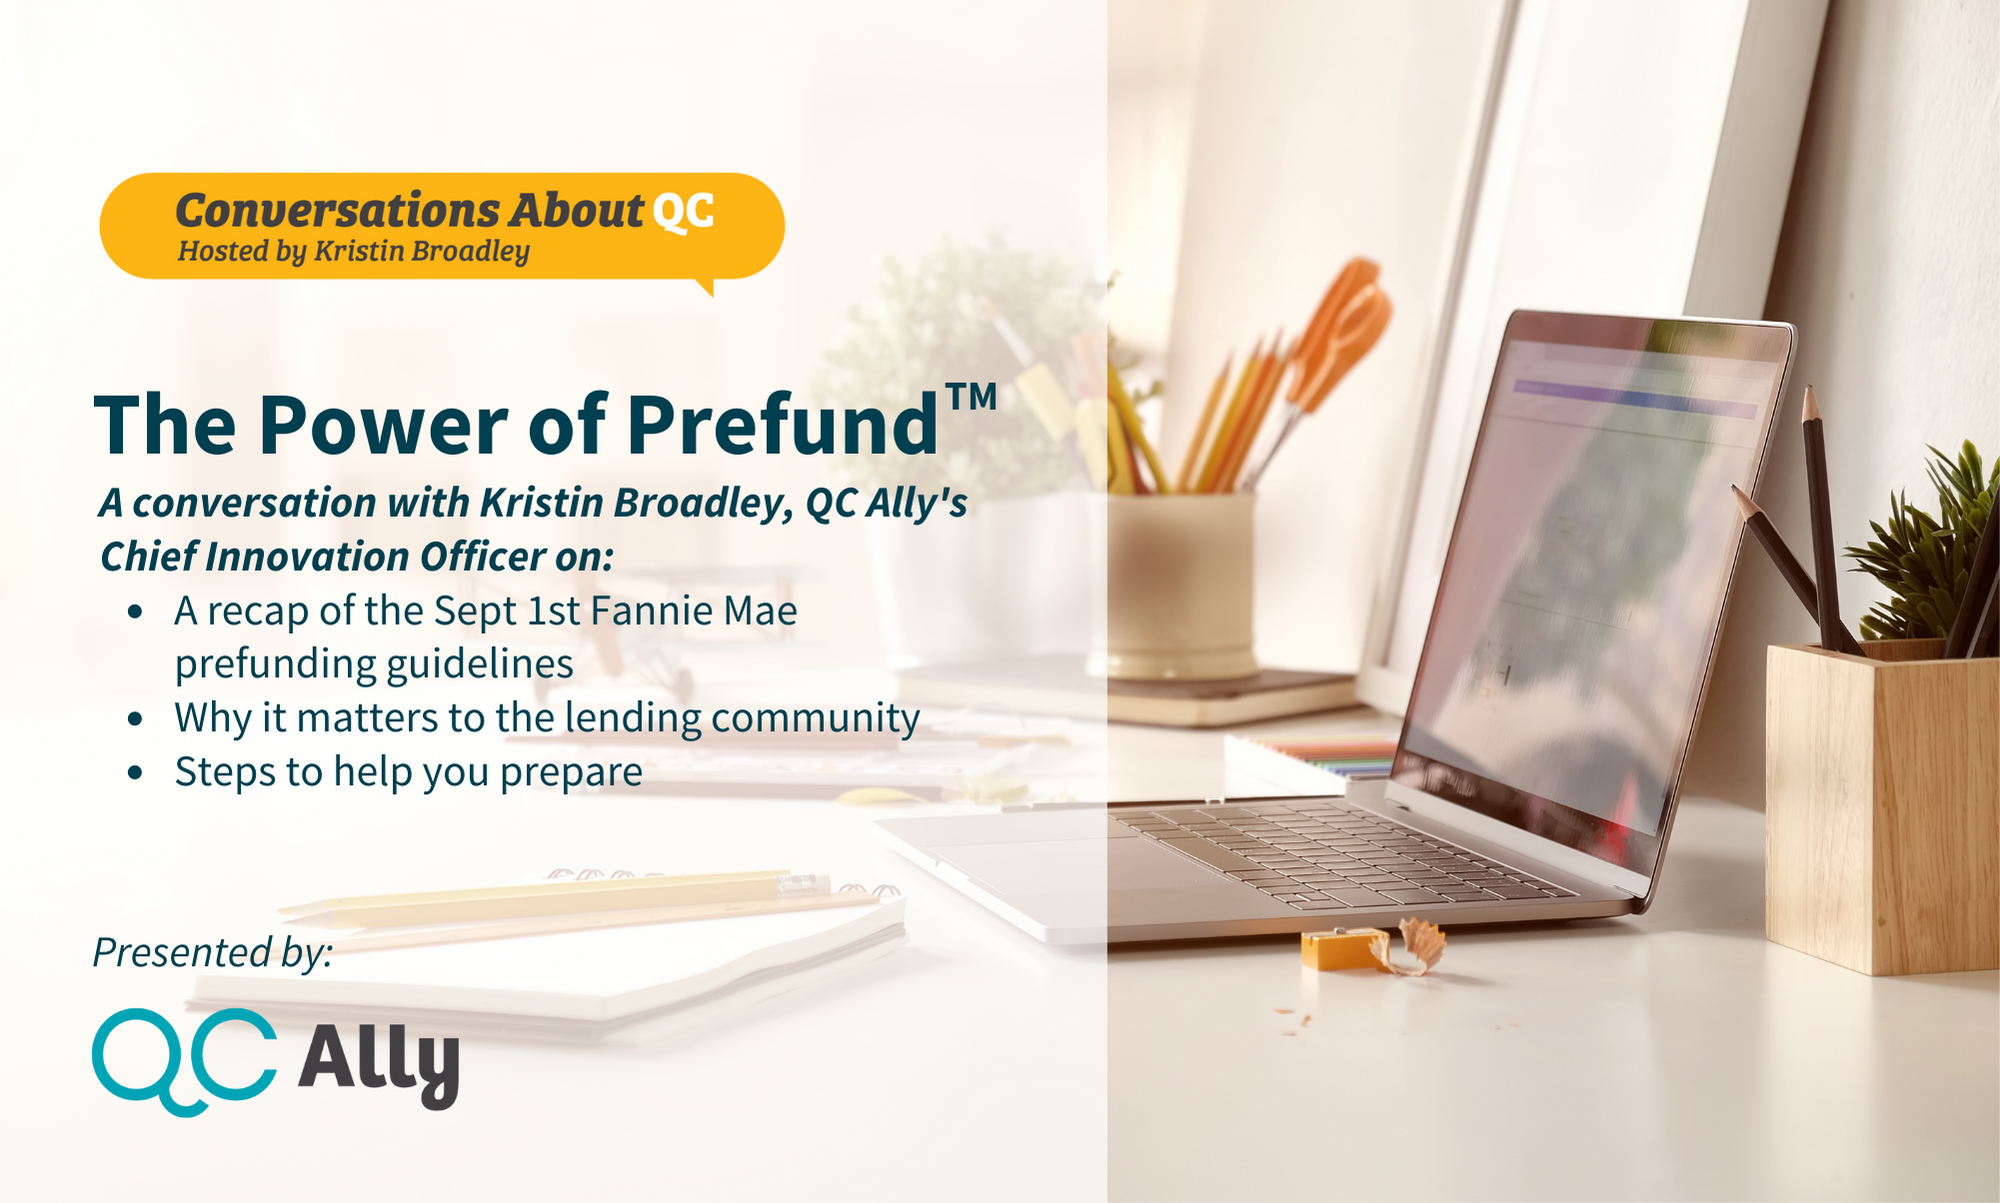 Conversations About QC: The Power of Prefund(TM)